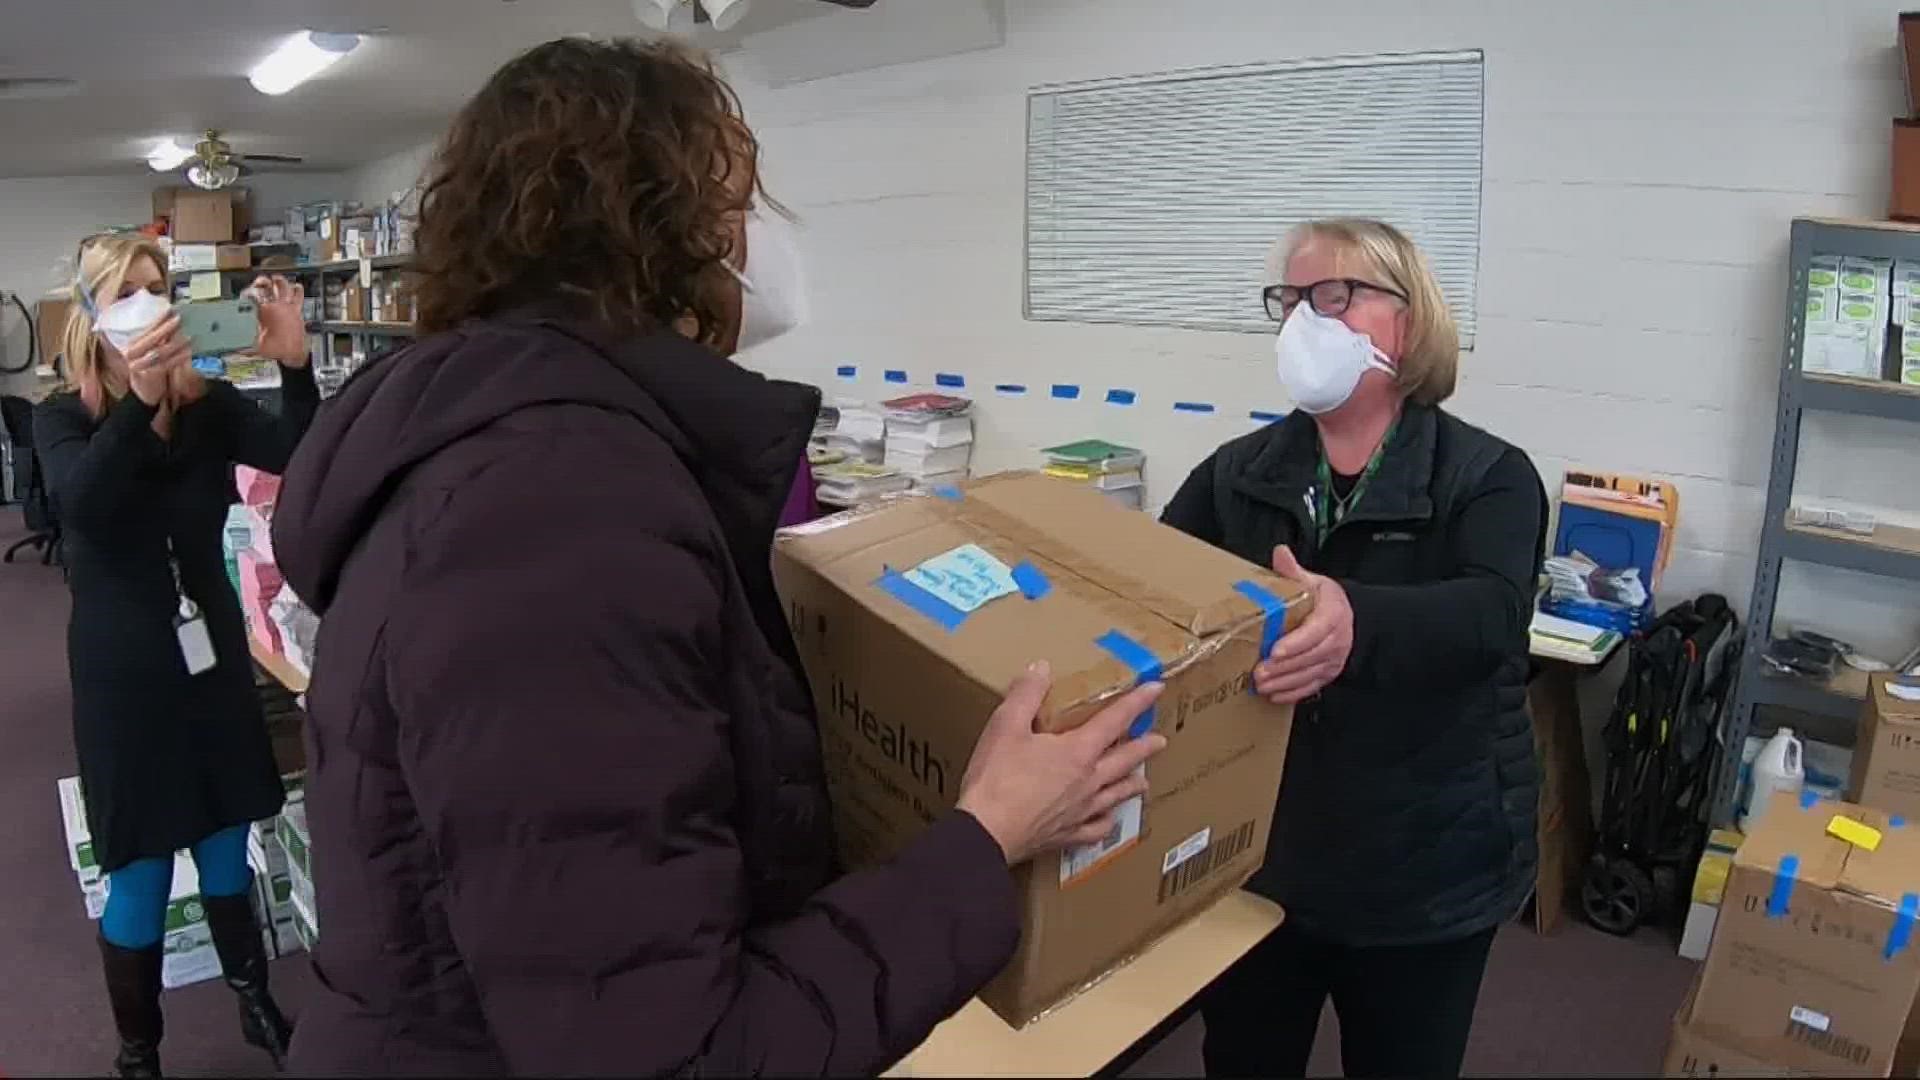 At-home tests were delivered to the health department late last week, and leaders began distributing them out to community groups on Tuesday.